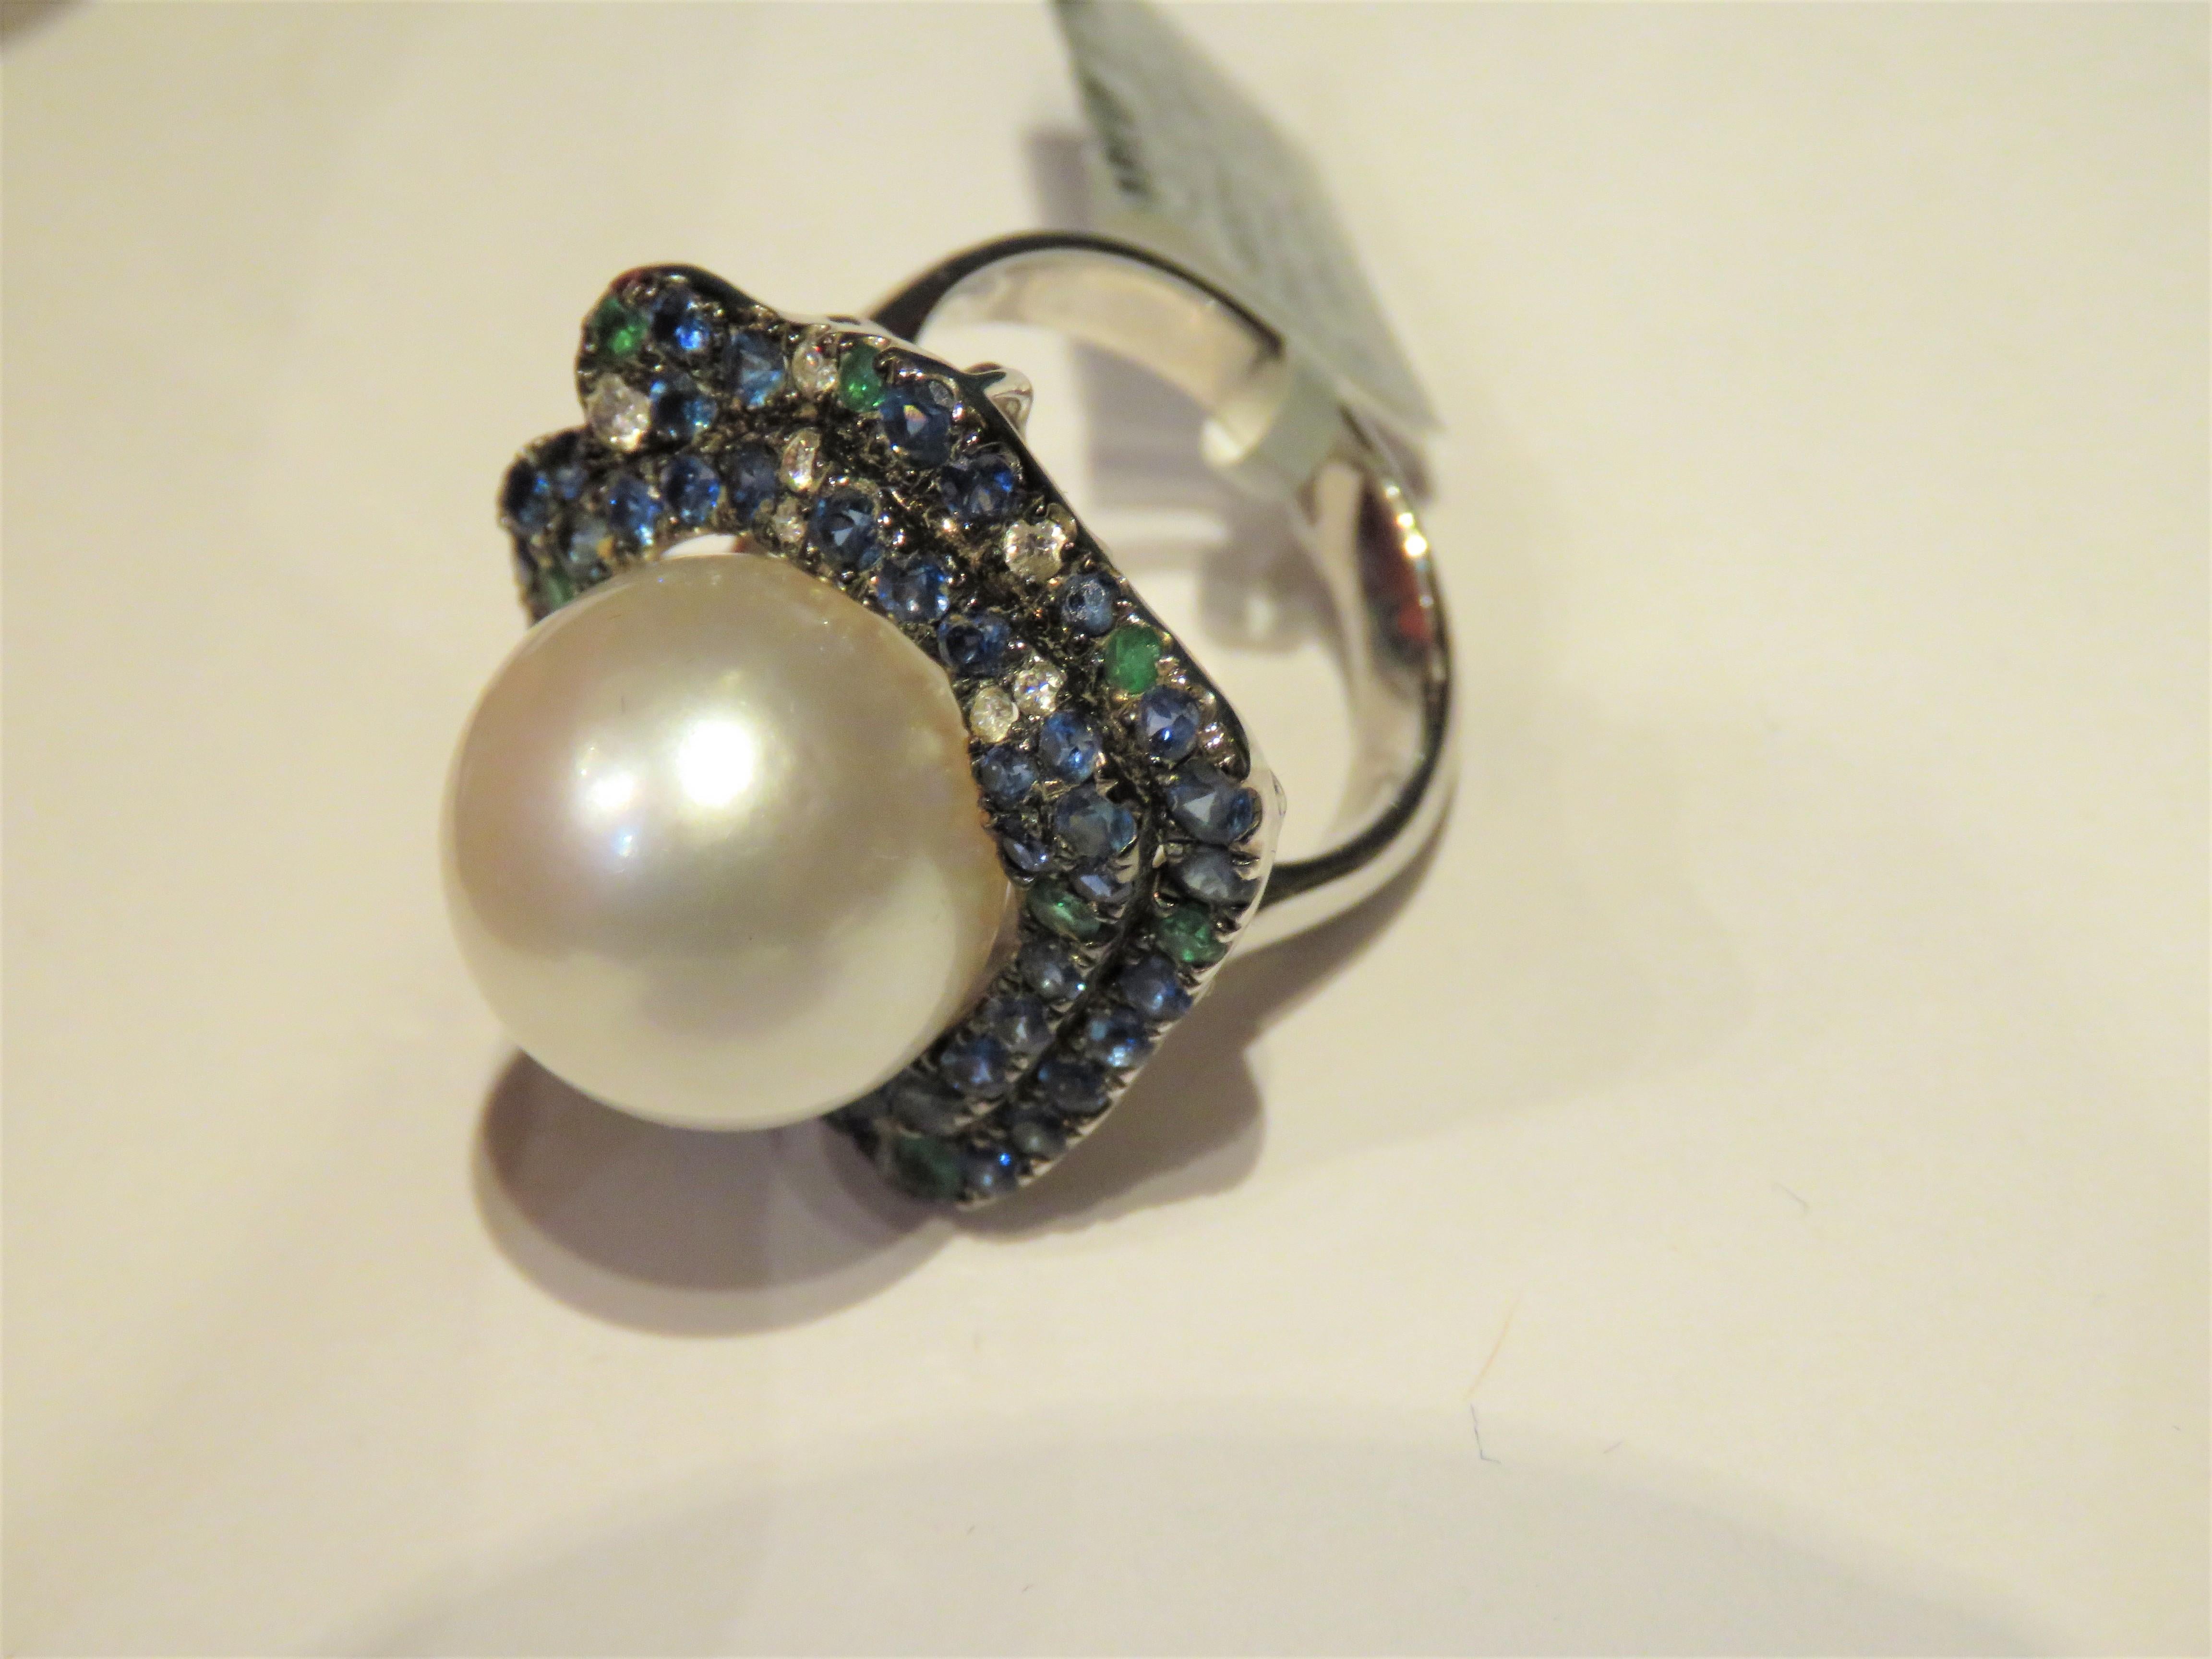 The Following Item we are offering is this Extremely Rare Beautiful 18KT Gold Fine Rare Large South Sea Pearl Fancy Diamond Ring. This Magnificent Ring is comprised of a Rare Fine 13MM-14MM Large South Sea Pearl and Round Gorgeous Glittering Blue